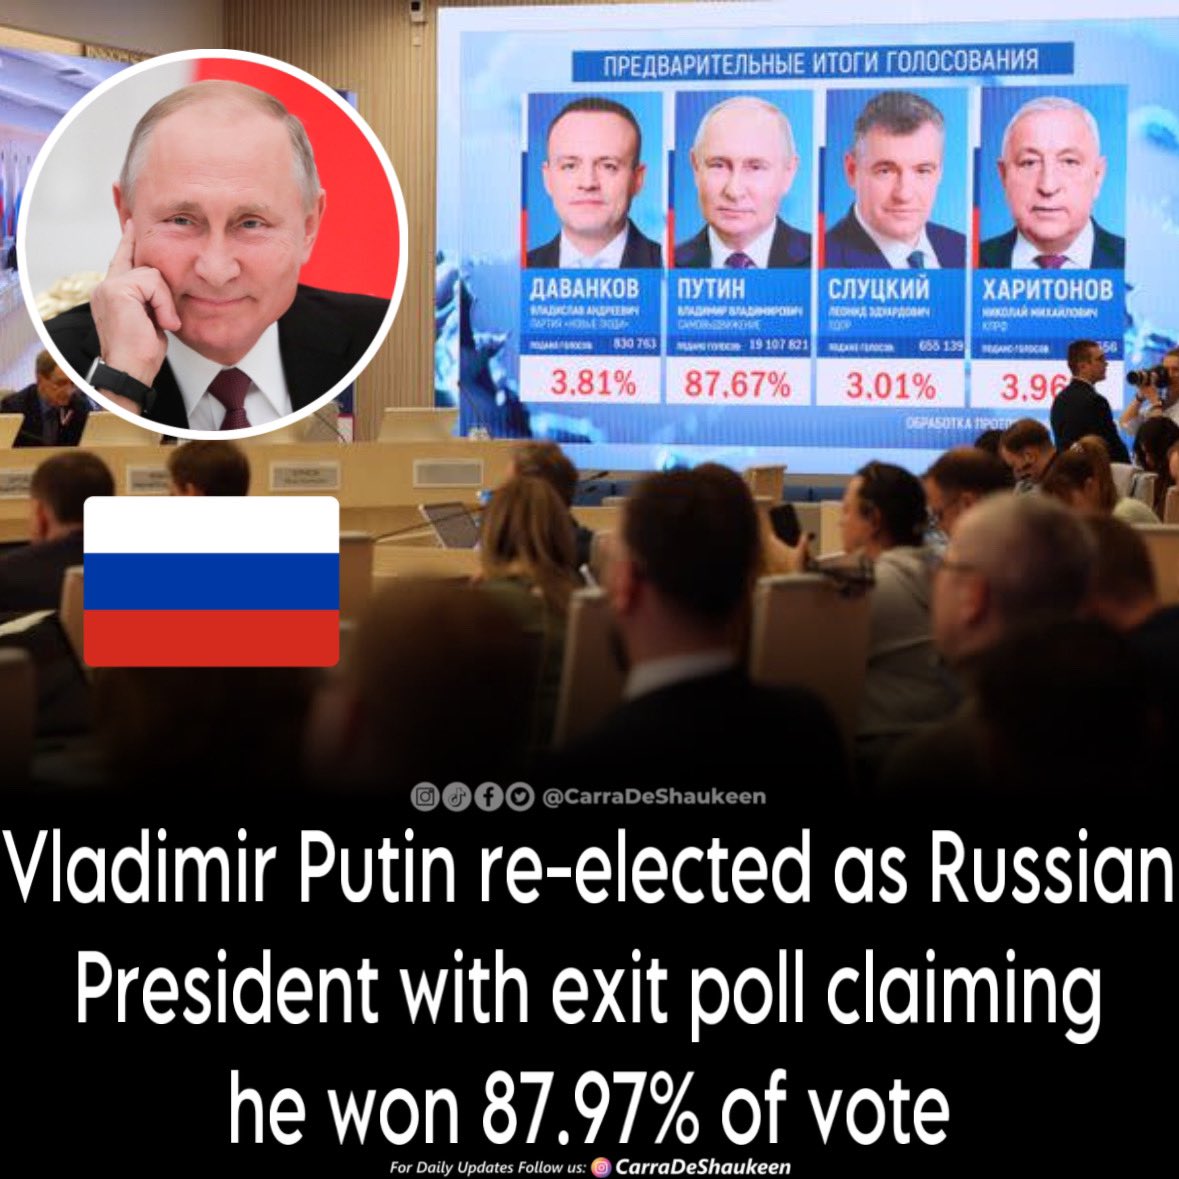 Vladimir Putin has won Russia’s presidential election with 87.97% of the vote, according to the first official results showed on Sunday after polls closed. #russia #vladimirputin #vladimir #russiapresidentialelections2024